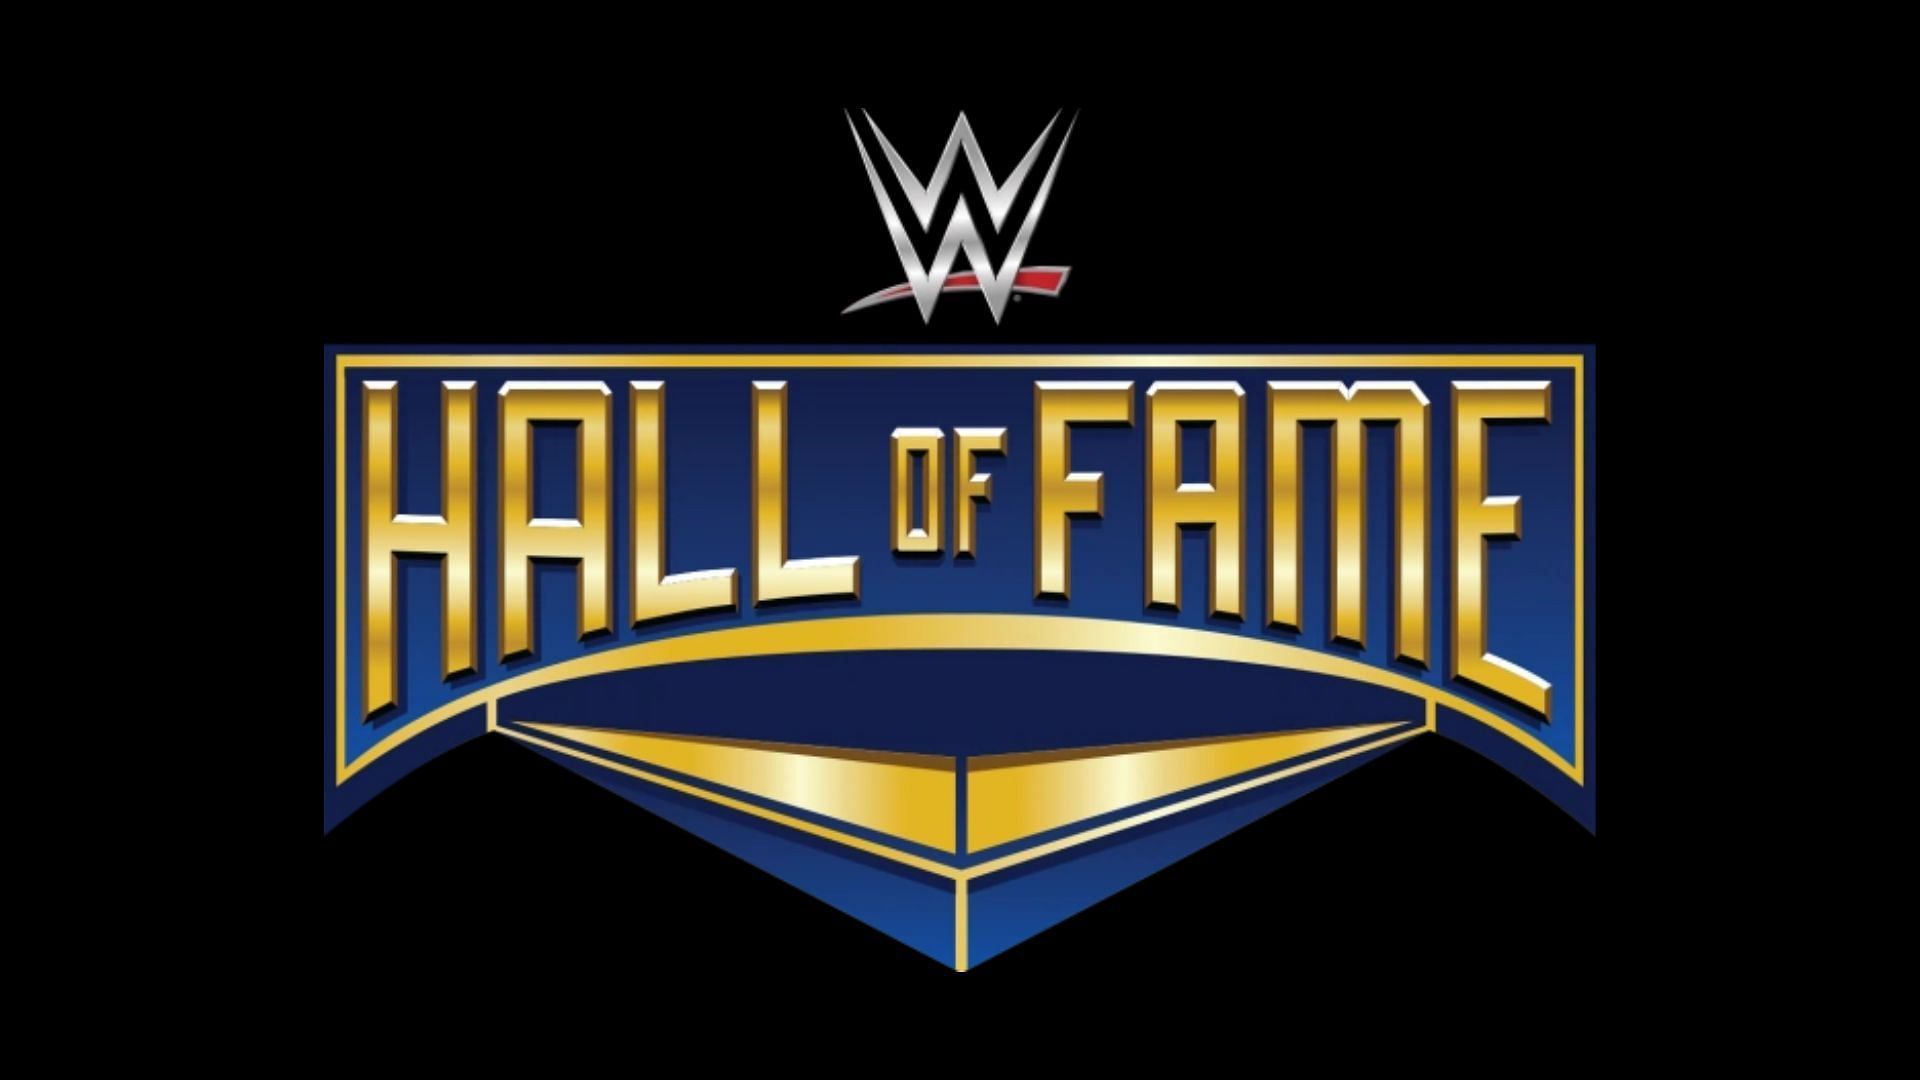 WWE Hall of Famers often make a comeback to the squared circle